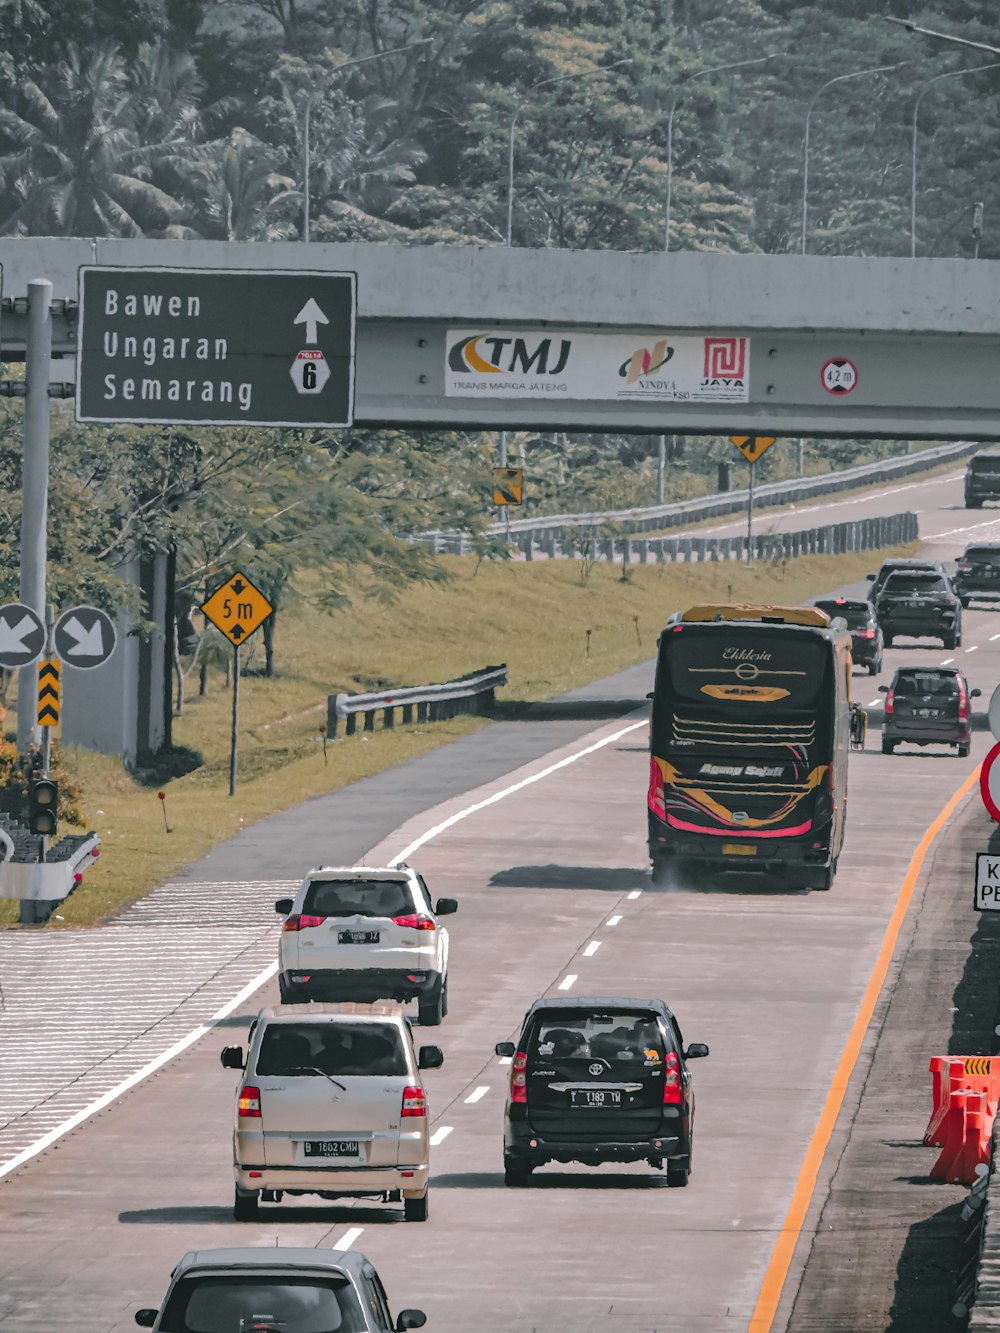 a highway with cars and a bus